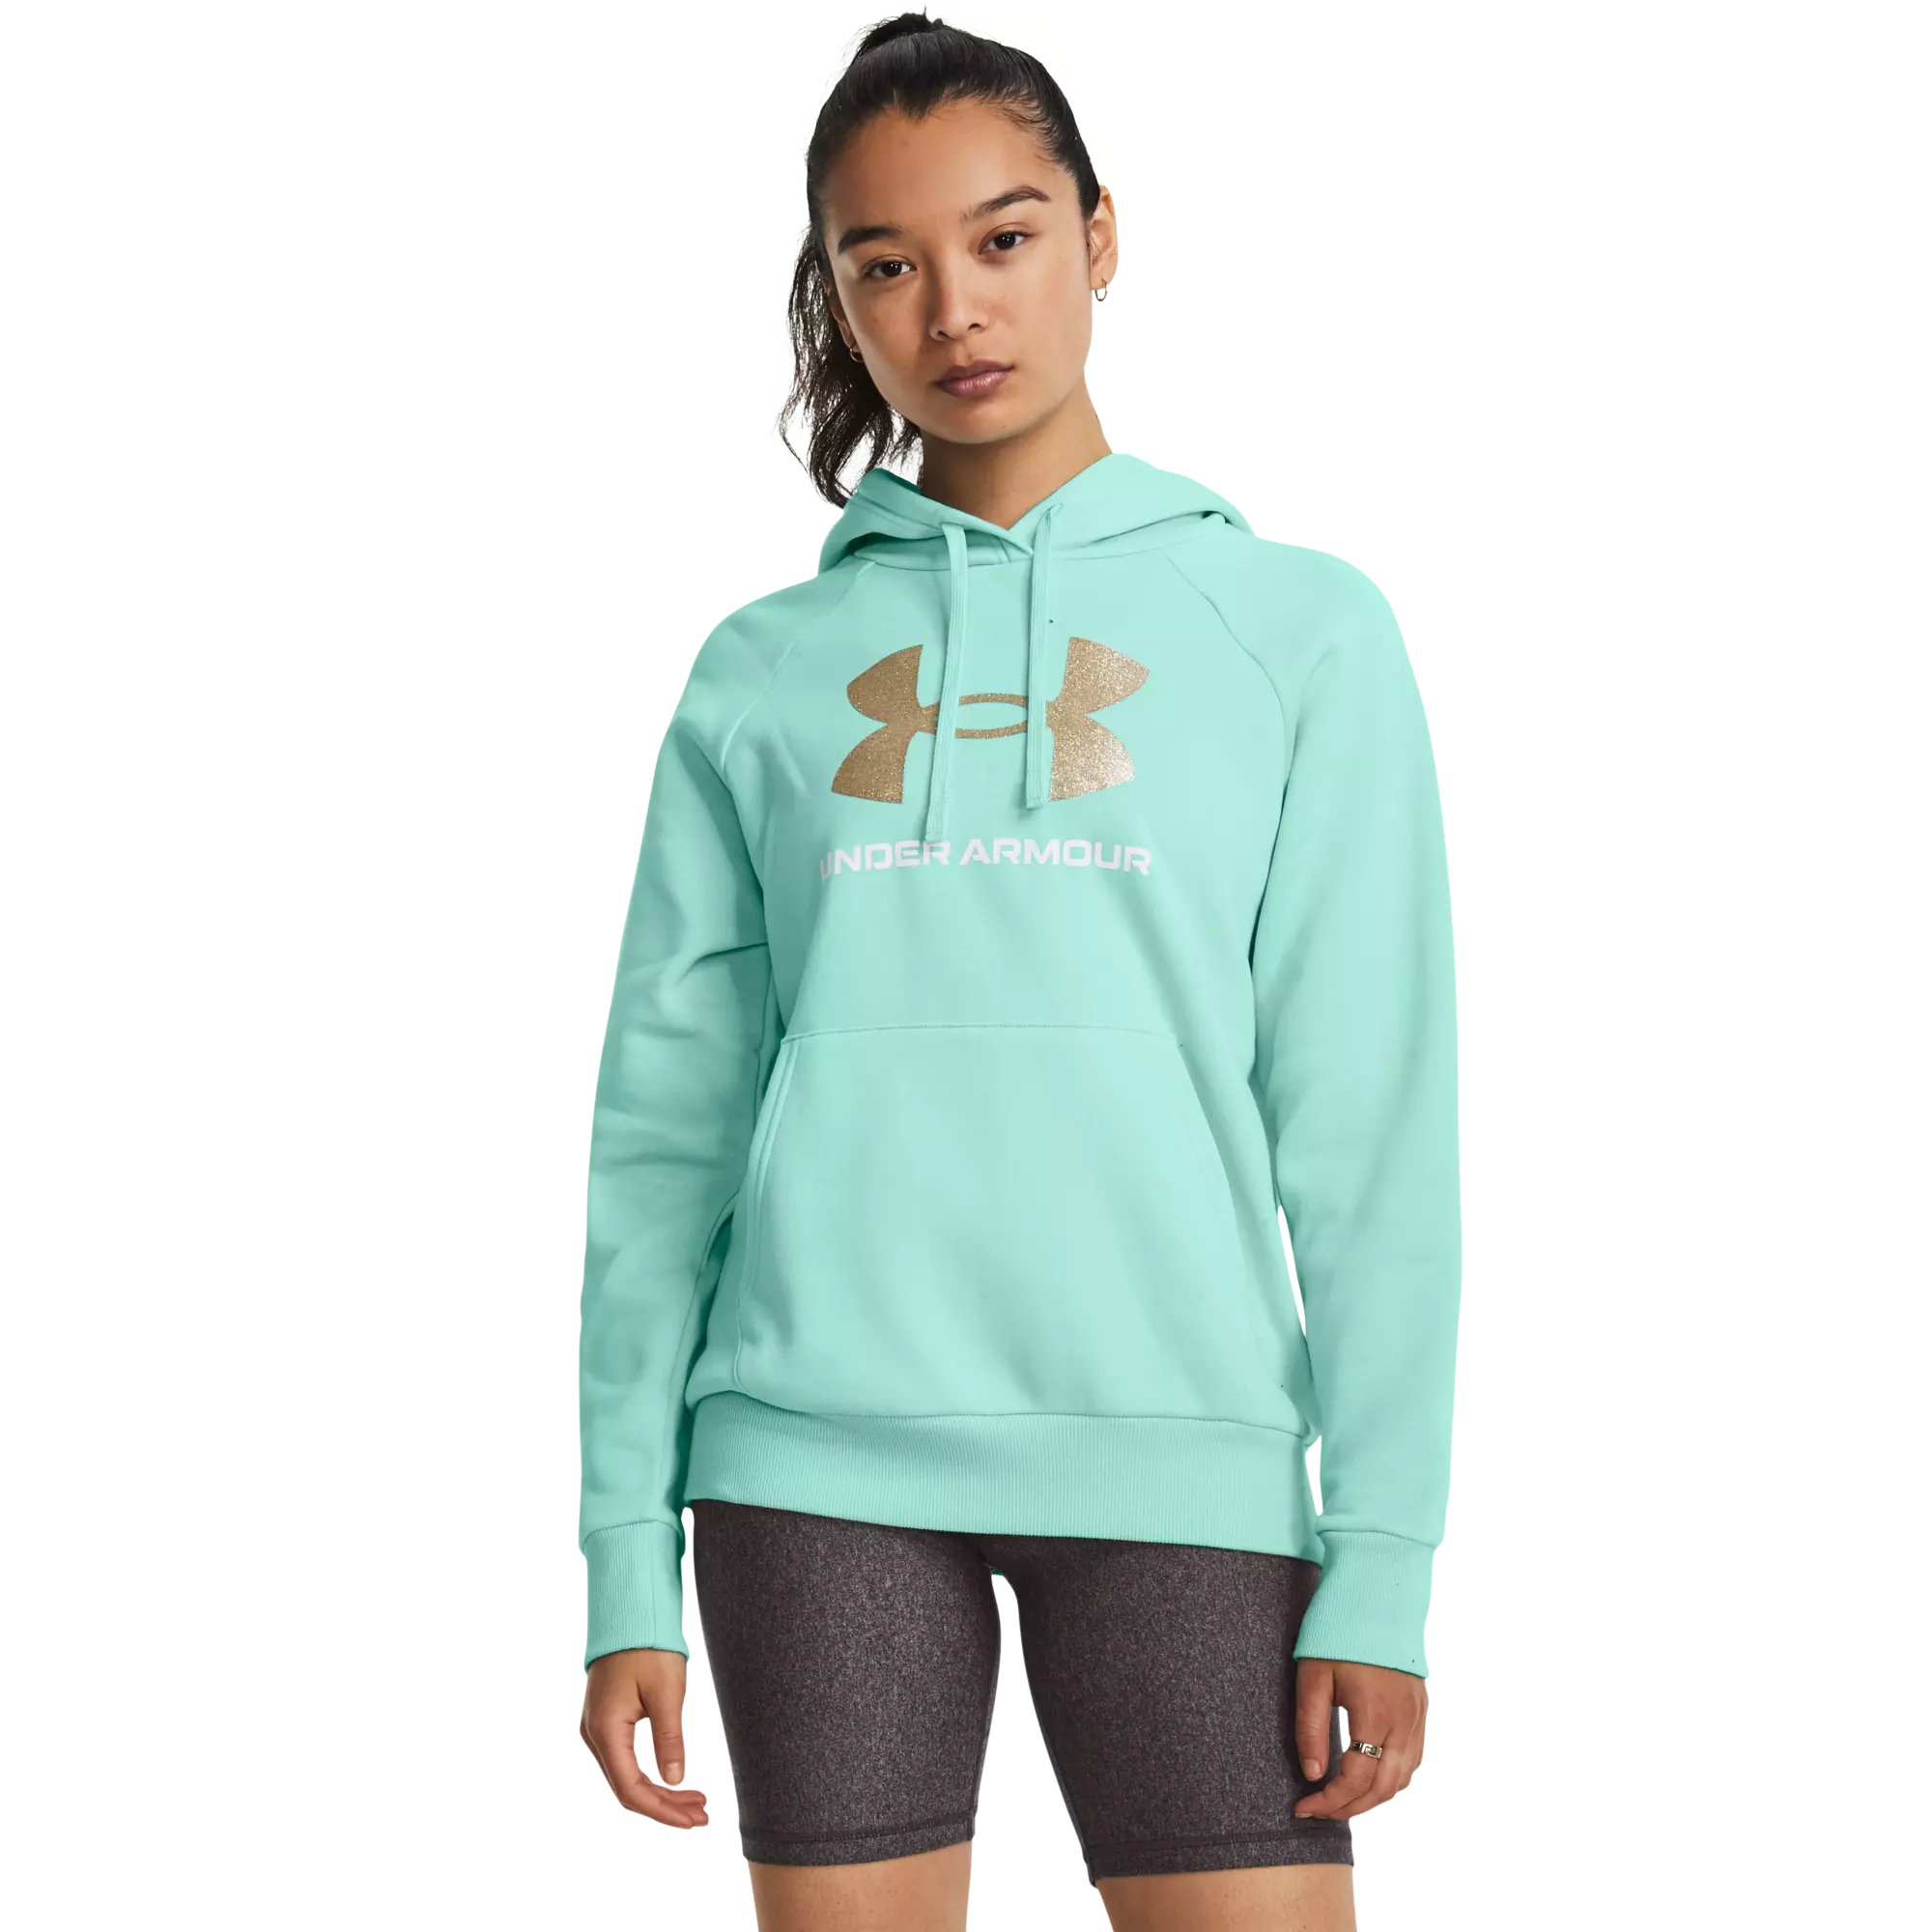 Women's Under Armour Rival Fleece Hoodie, Size: Small, Med Blue